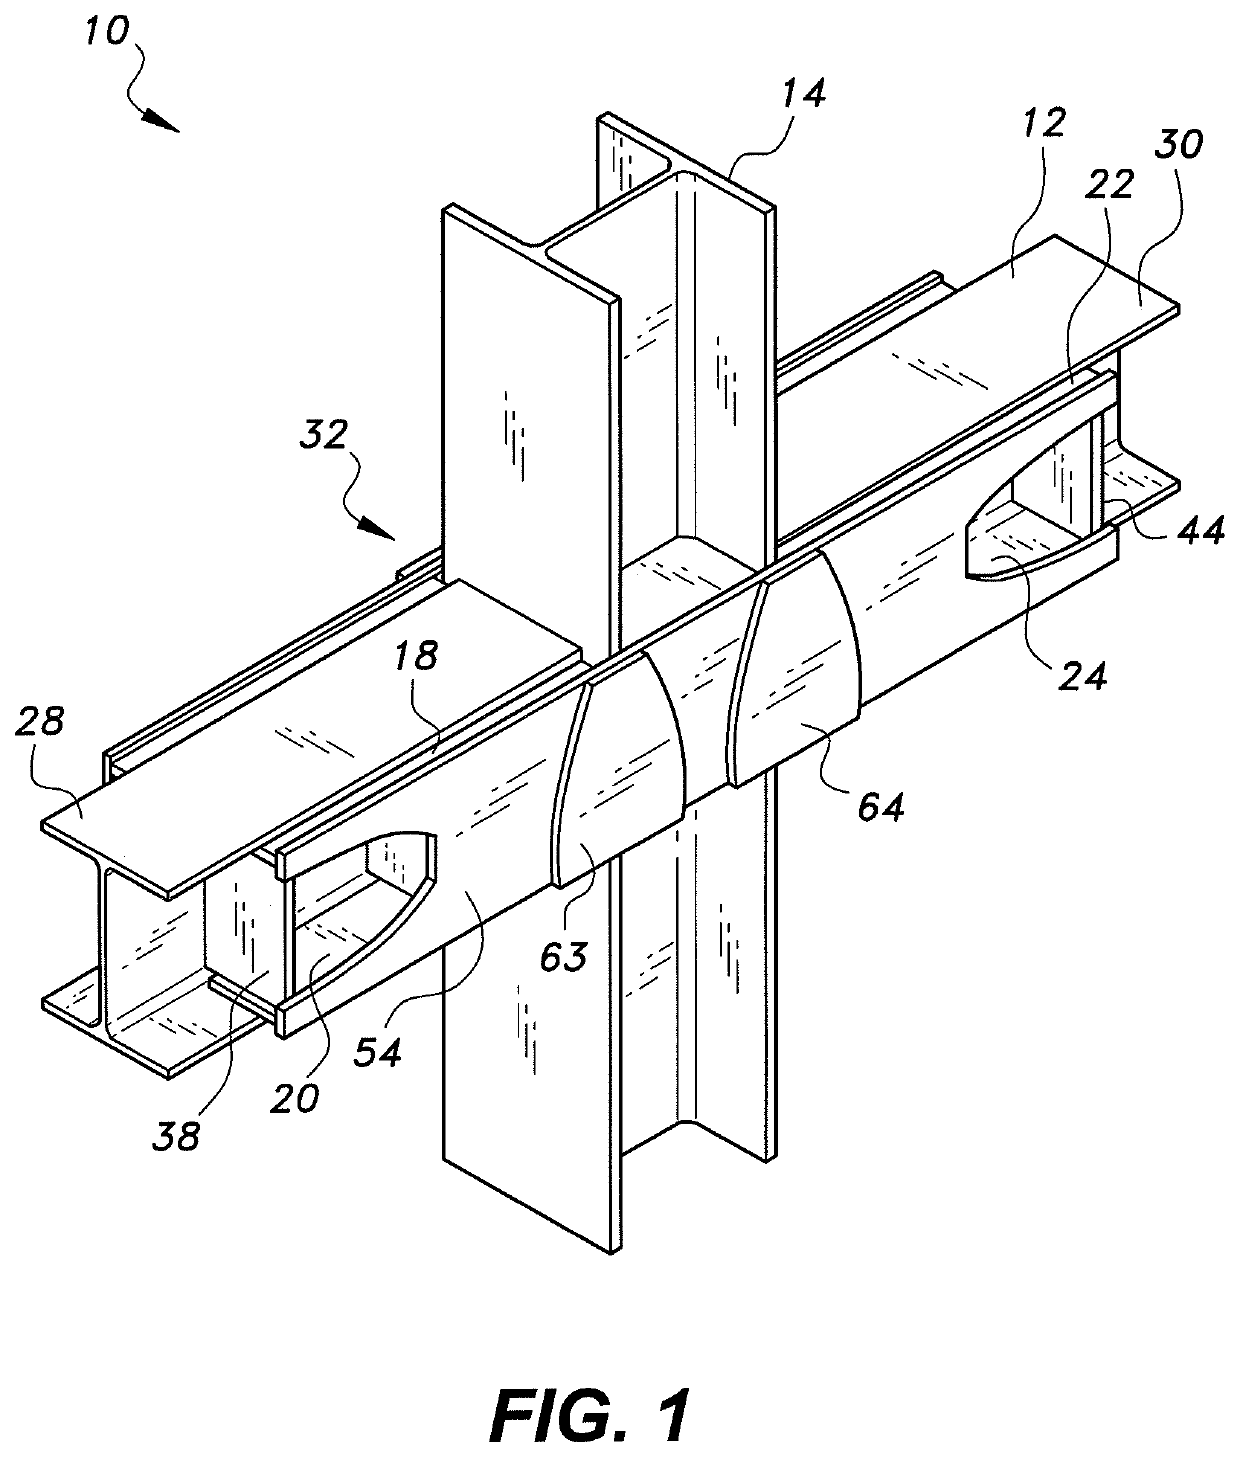 Reinforced joint for beam-column connection